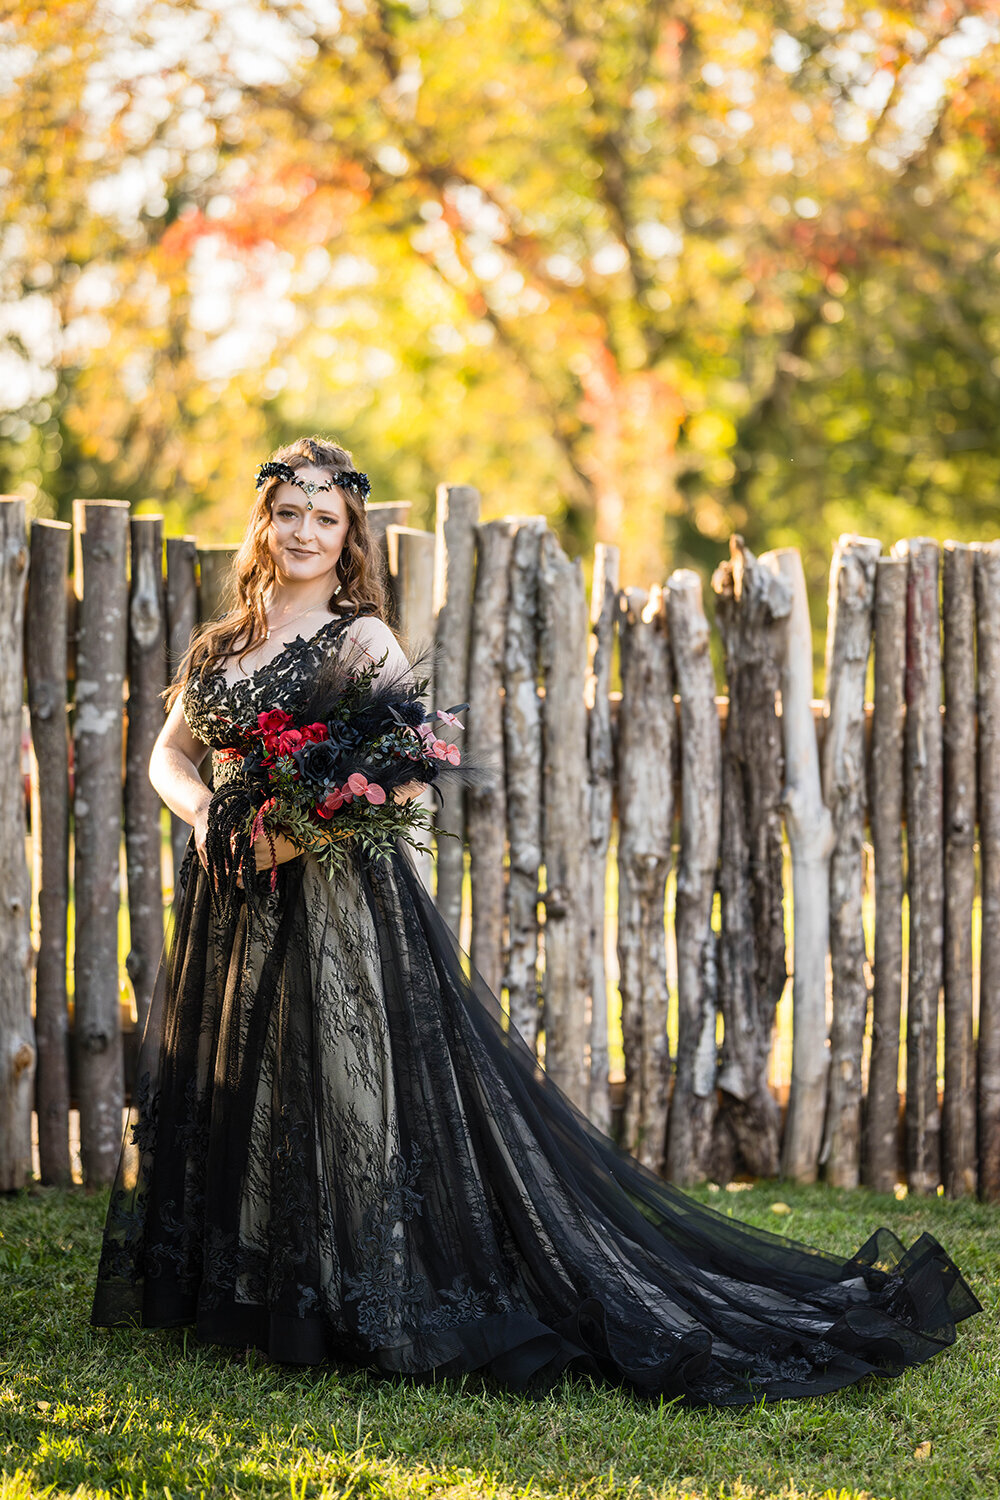 A lesbian bride wearing a black wedding dress and holding a DIY black and red wedding bouquet stands and smiles in the backyard of an Airbnb at golden hour in Roanoke, Virginia for a formal portrait.